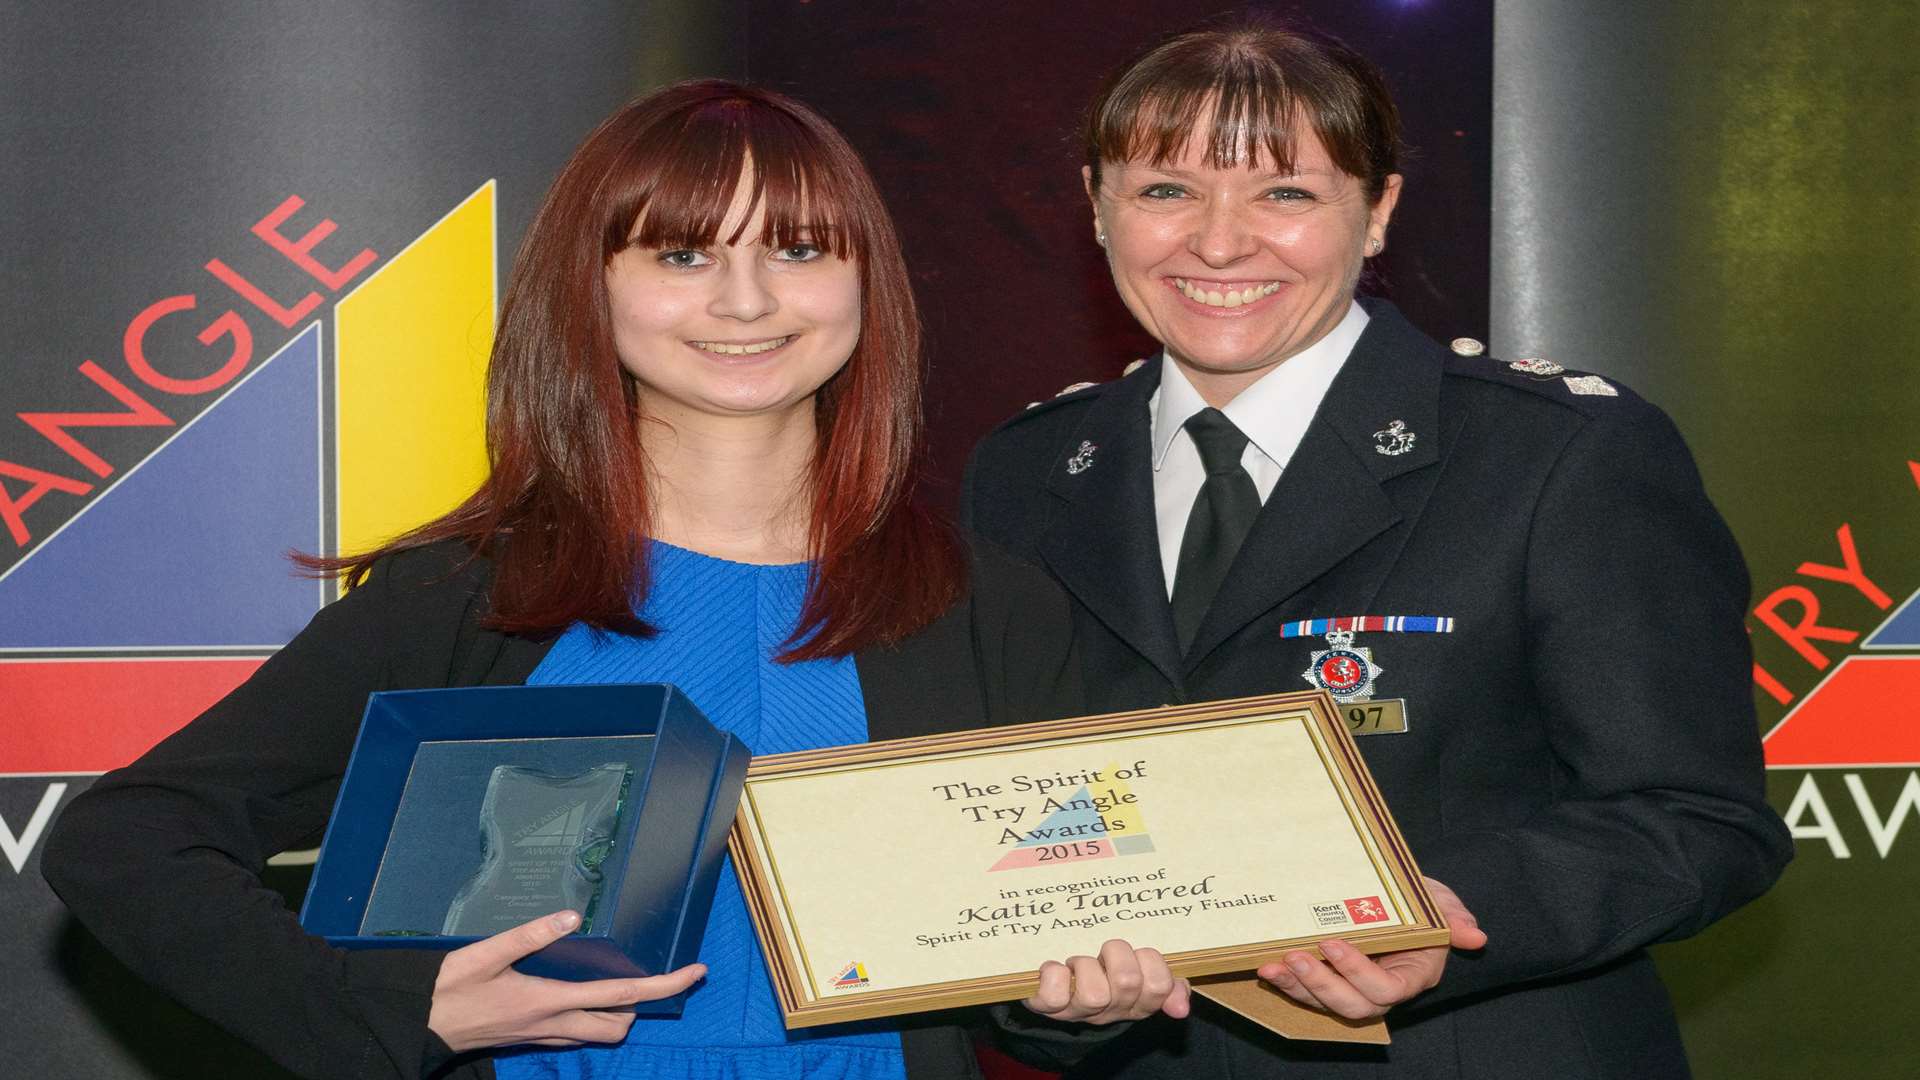 Katie Tancred was given her award by Kent Police Chief Superintendent Julia Chapman.